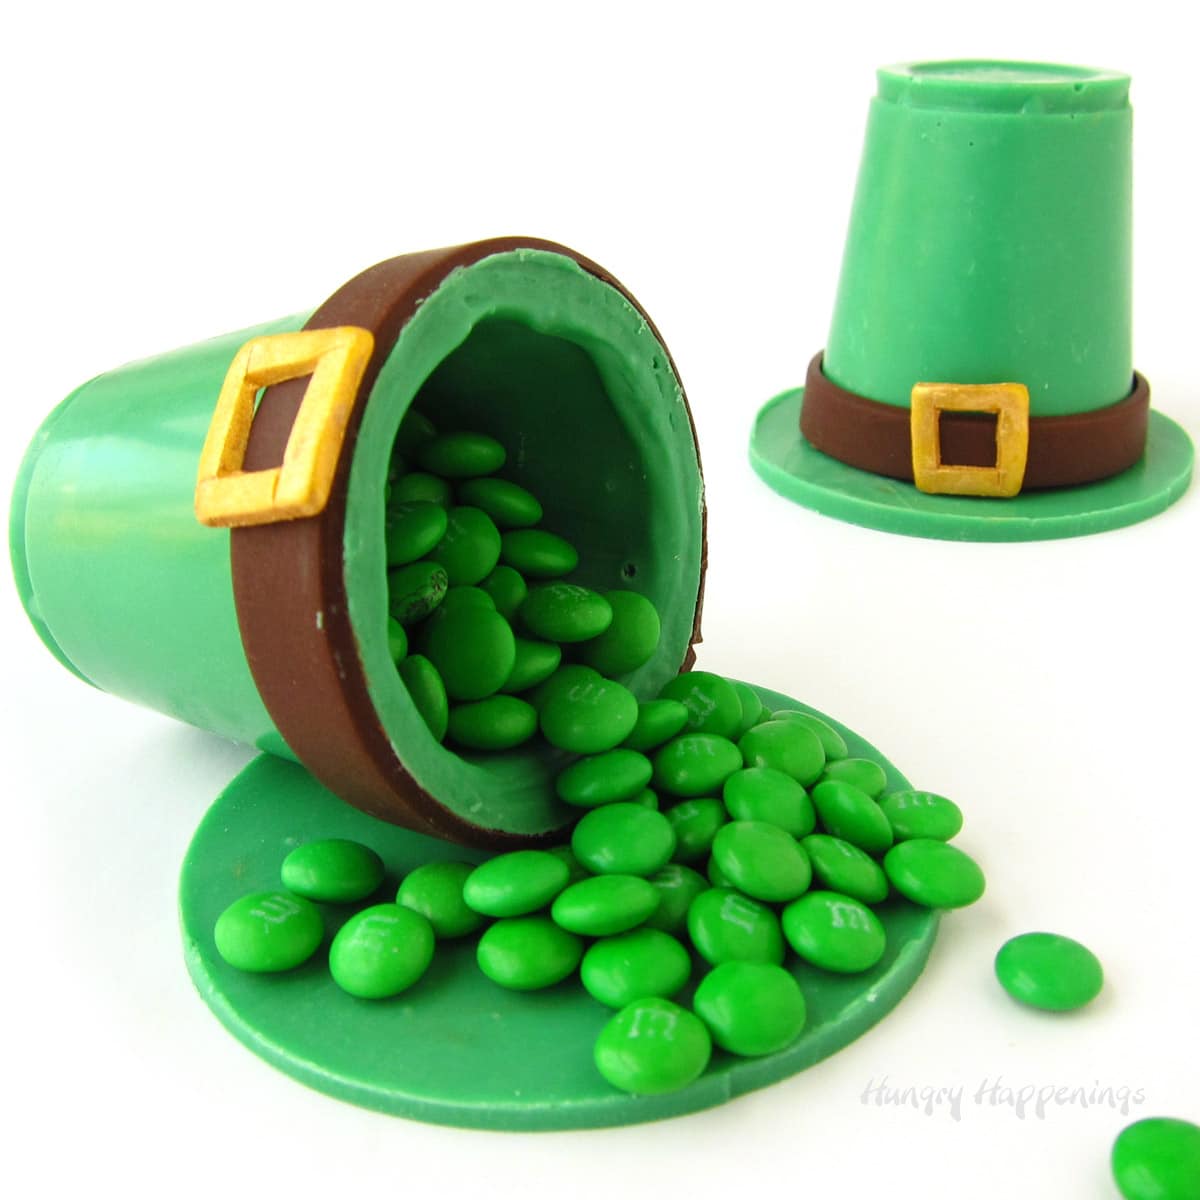 St. Patrick's Day chocolate leprechaun hats filled with green M&Ms